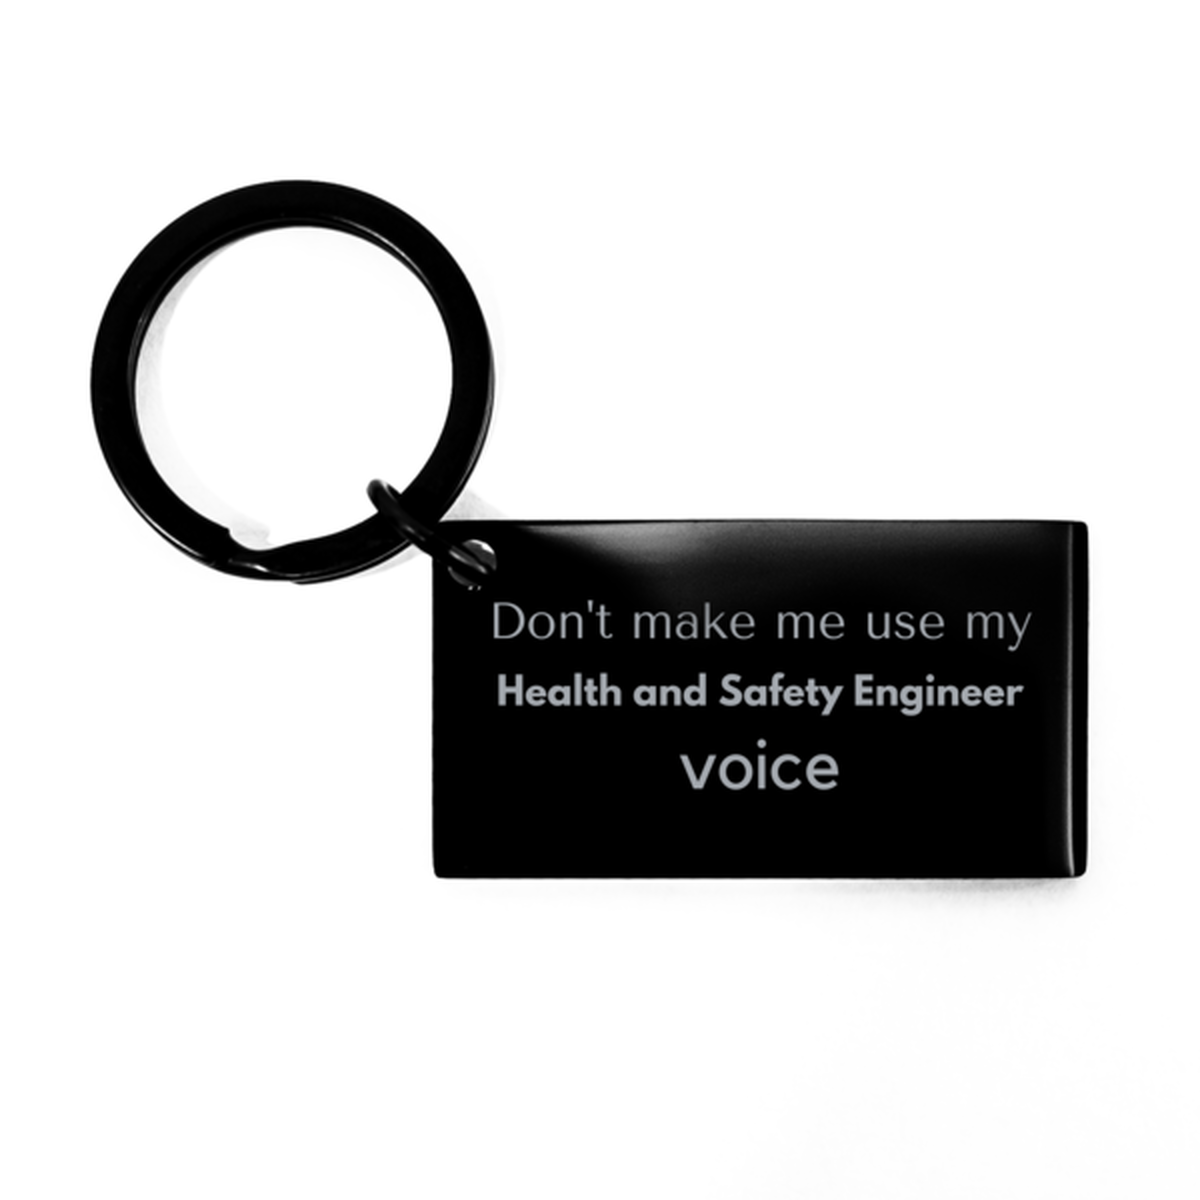 Don't make me use my Health and Safety Engineer voice, Sarcasm Health and Safety Engineer Gifts, Christmas Health and Safety Engineer Keychain Birthday Unique Gifts For Health and Safety Engineer Coworkers, Men, Women, Colleague, Friends